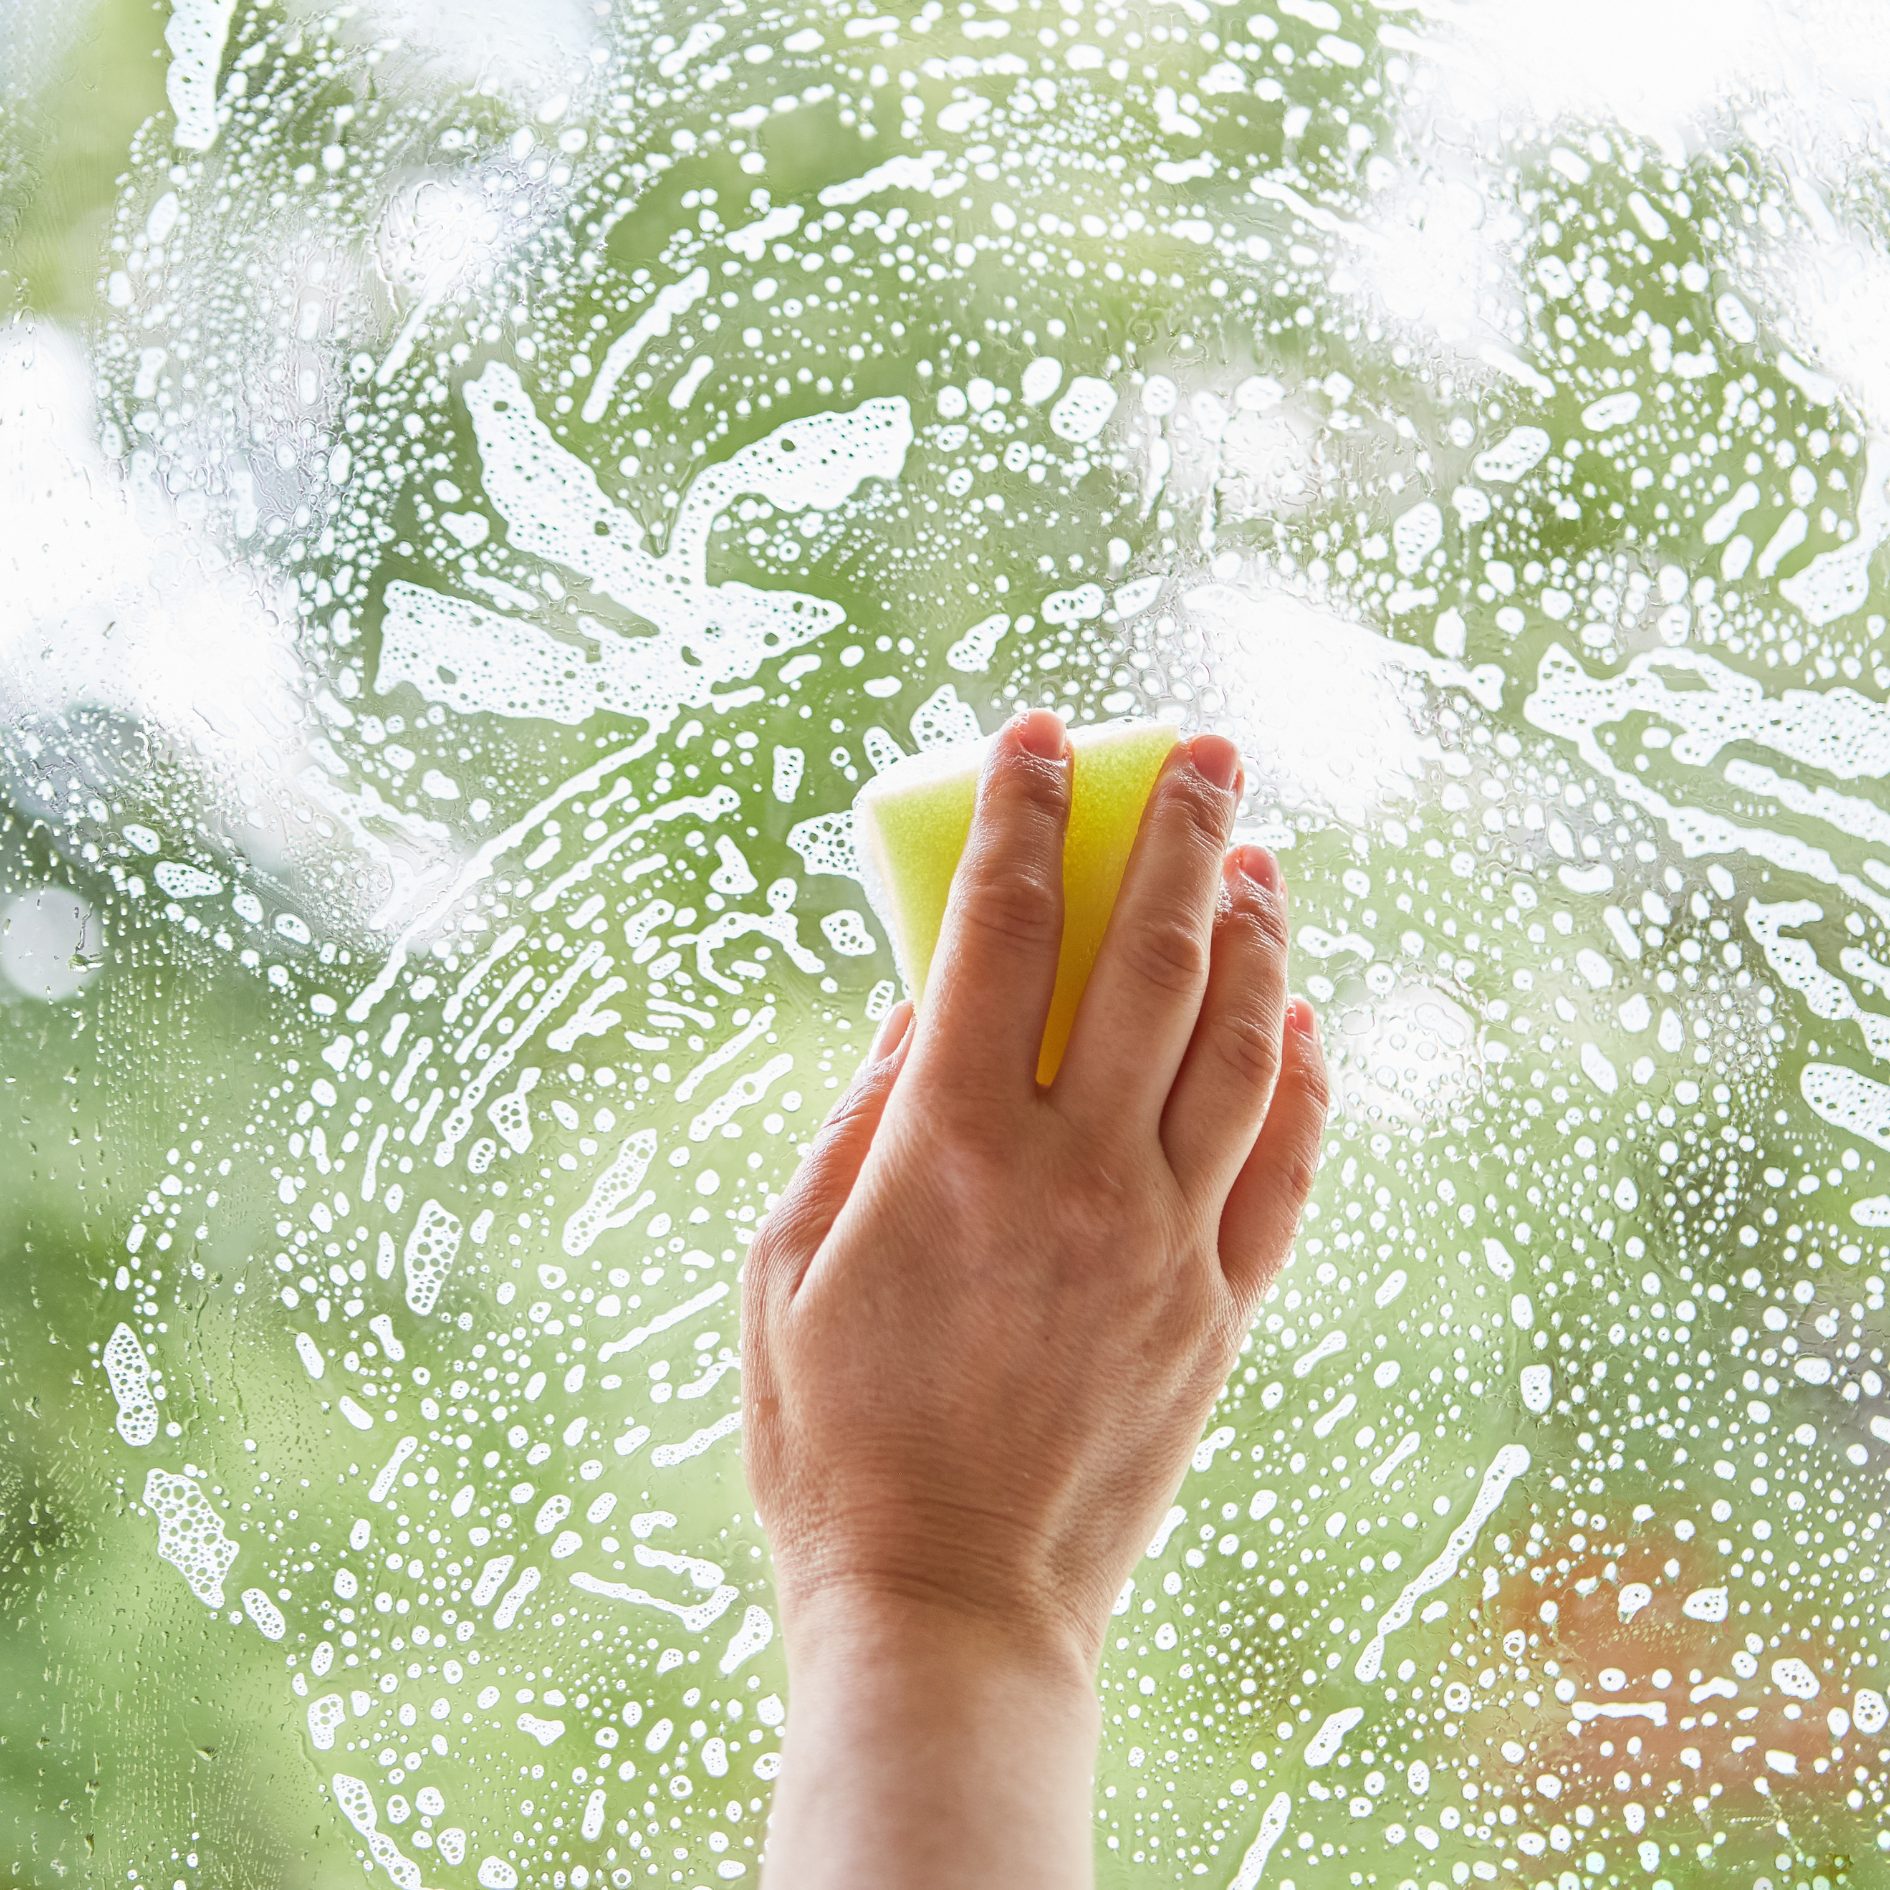 Spring cleaning windows with sponge